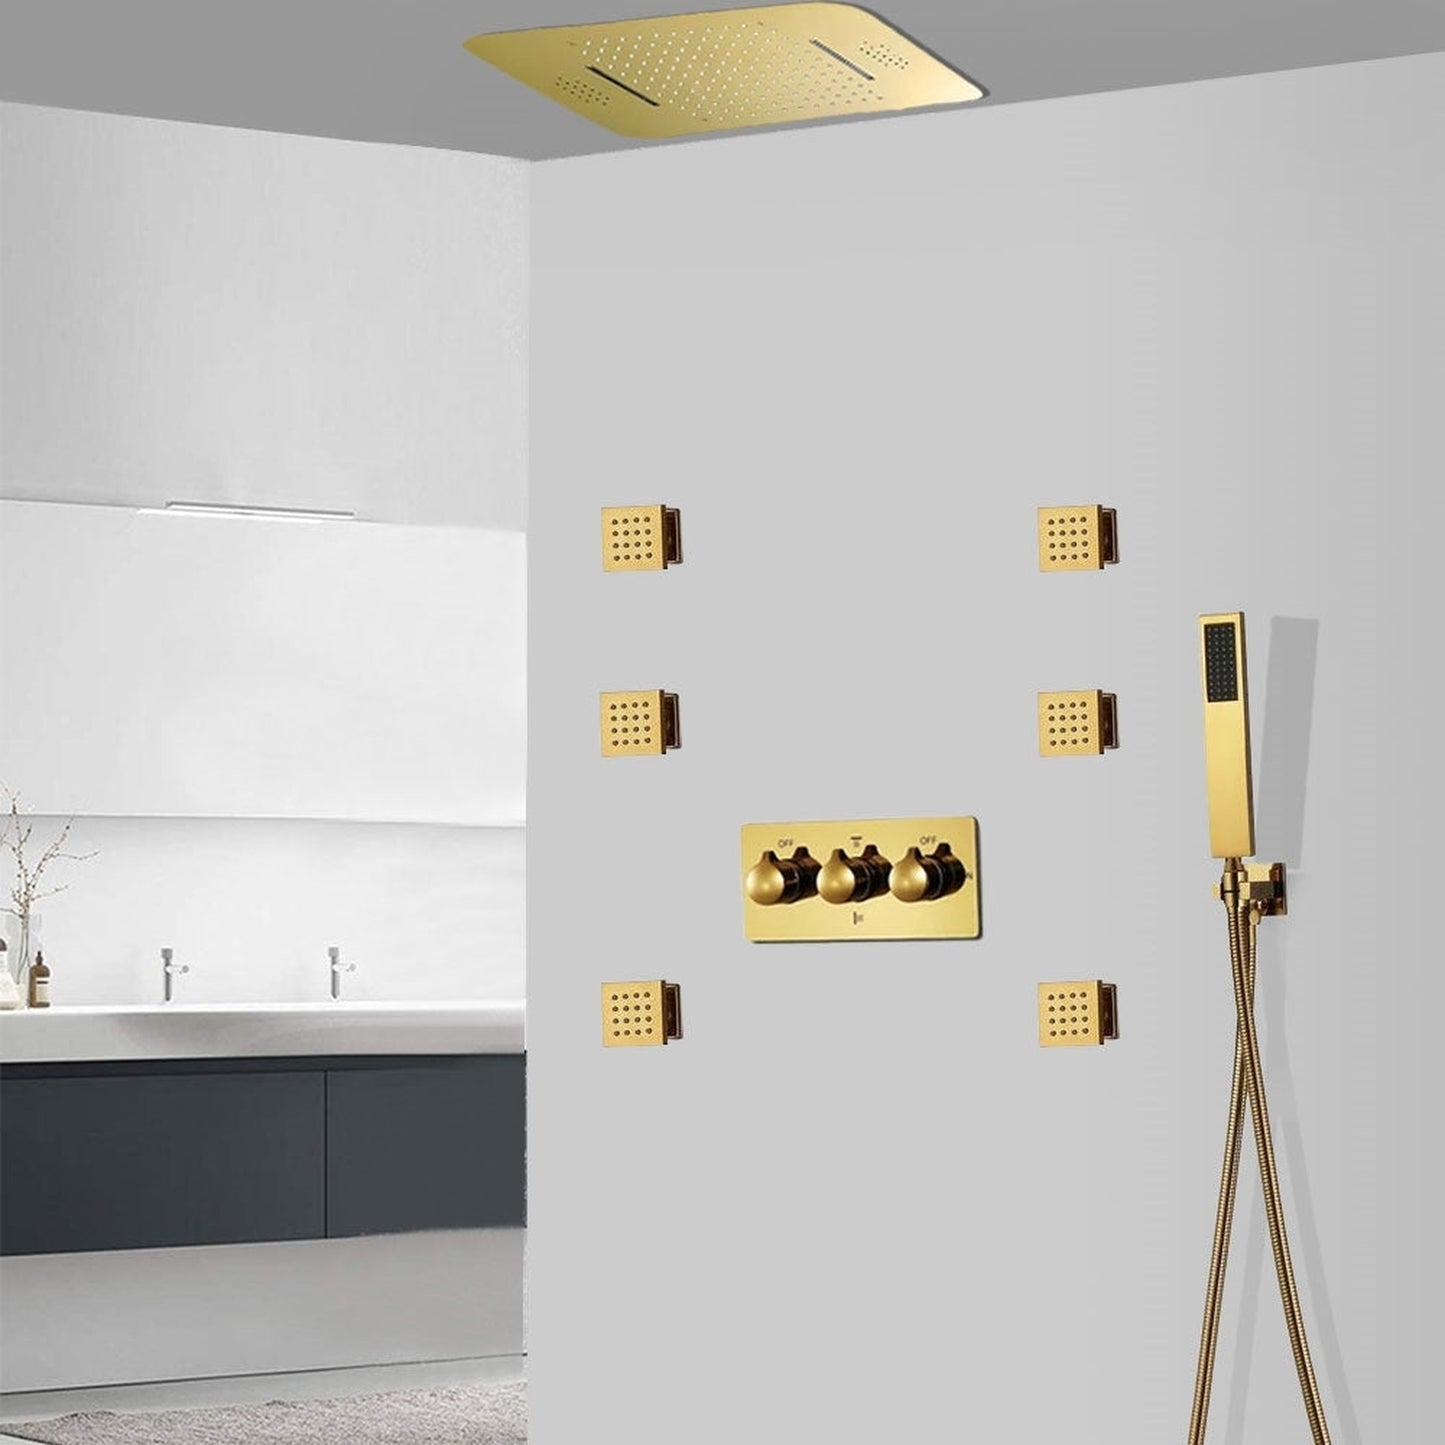 Fontana Foligno Gold Recessed Ceiling Mounted Thermostatic LED Remote Controlled Rainfall Waterfall Shower System With 6-Jet Body Sprays and Hand Shower